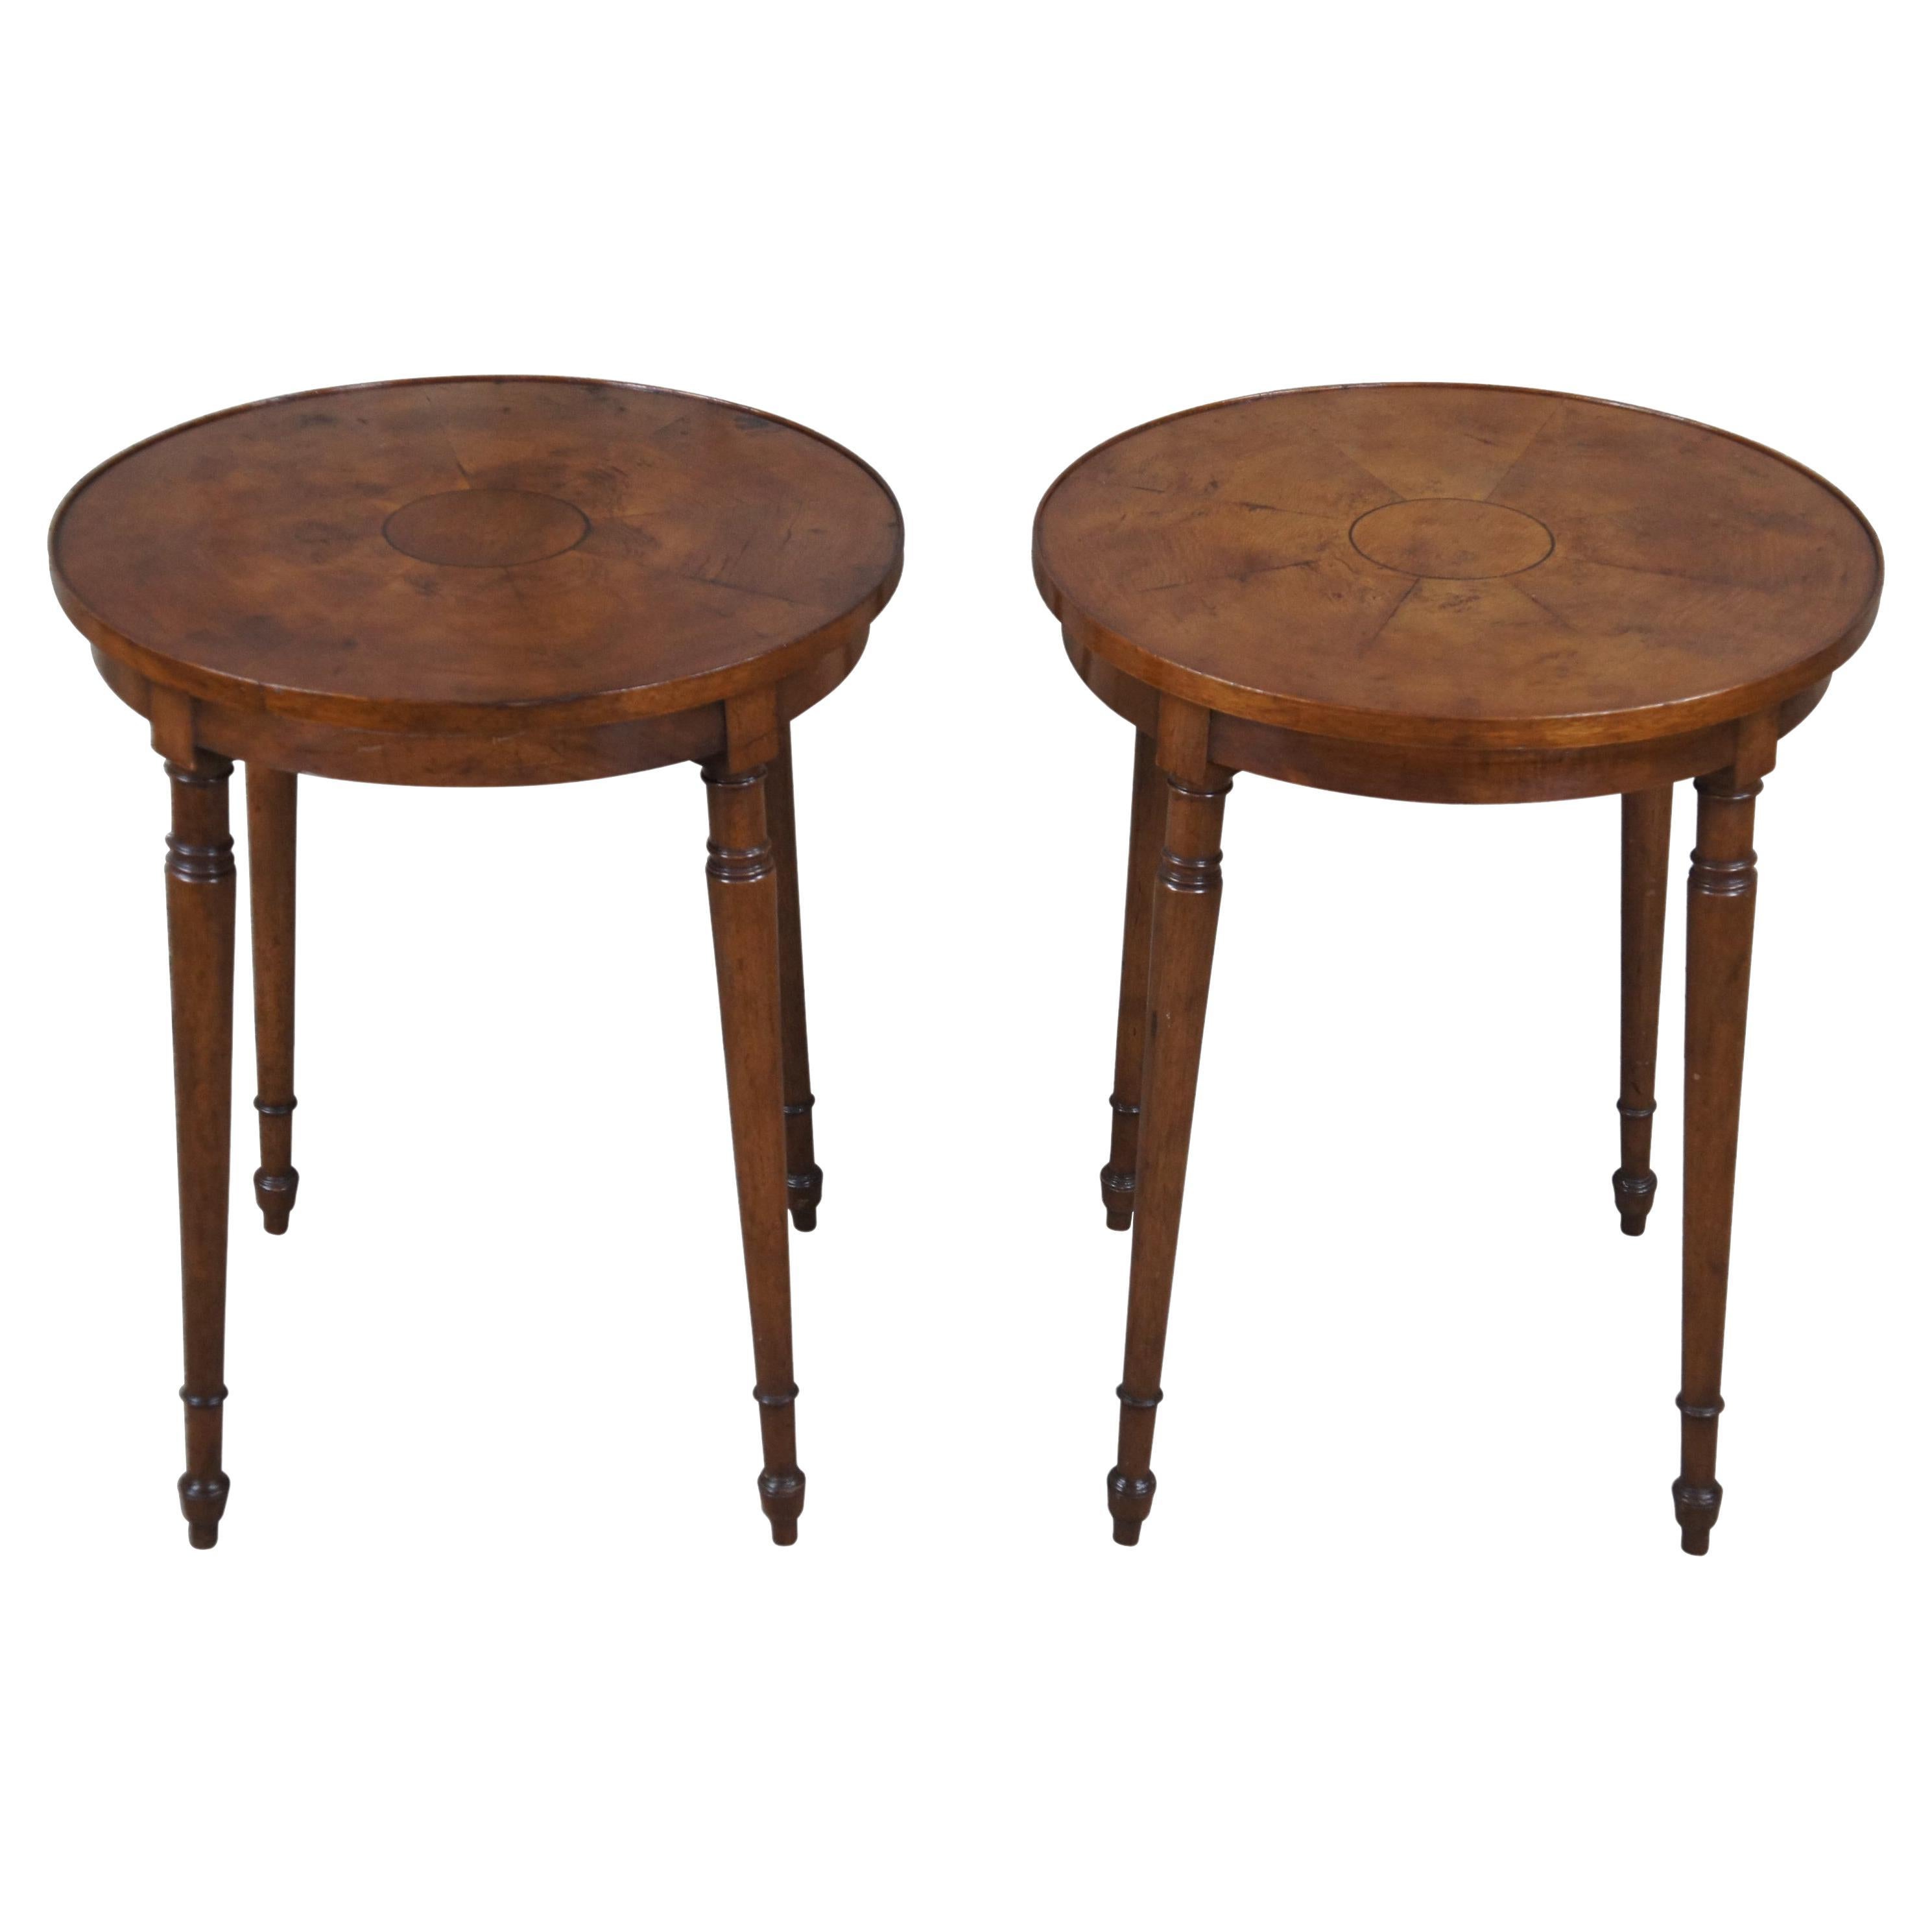 2 Victorian Revival Old Colony Furniture Walnut Burl Round Spindle Leg Tables